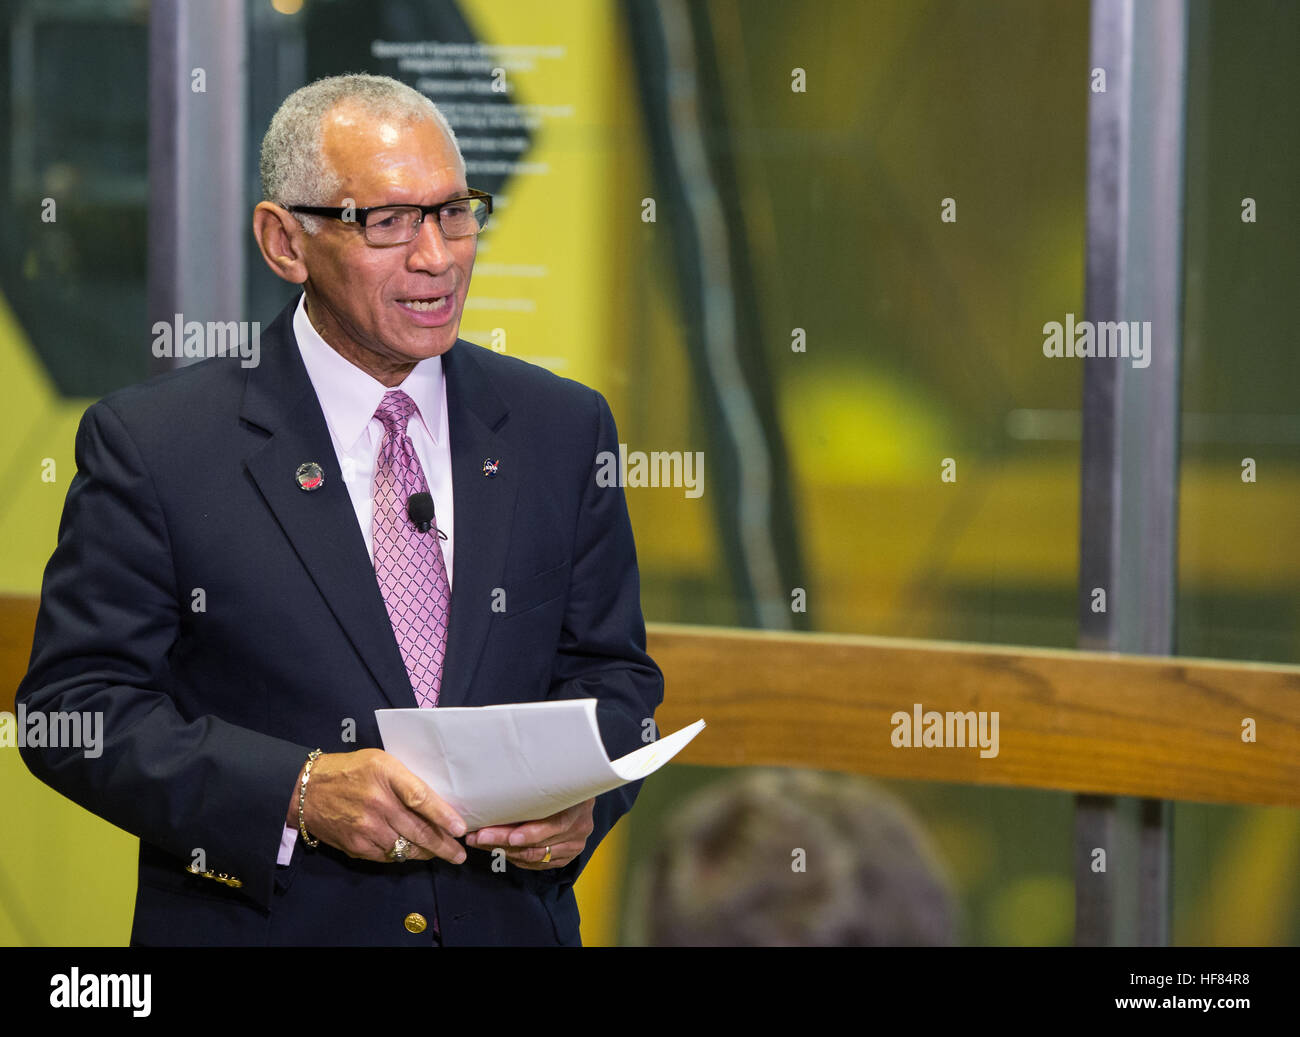 NASA Administrator Charles Bolden speaks about the James Webb Space Telescope during a media event on Wednesday, Nov. 2, 2016 at NASA's Goddard Spaceflight Center in Greenbelt, Md. The James Webb Space Telescope, the world's largest and most complex space telescope, will study every phase in the history of the universe; from the first luminous glows of the Big Bang, to the formation of planetary systems capable of supporting life, to the evolution of our own solar system. Stock Photo